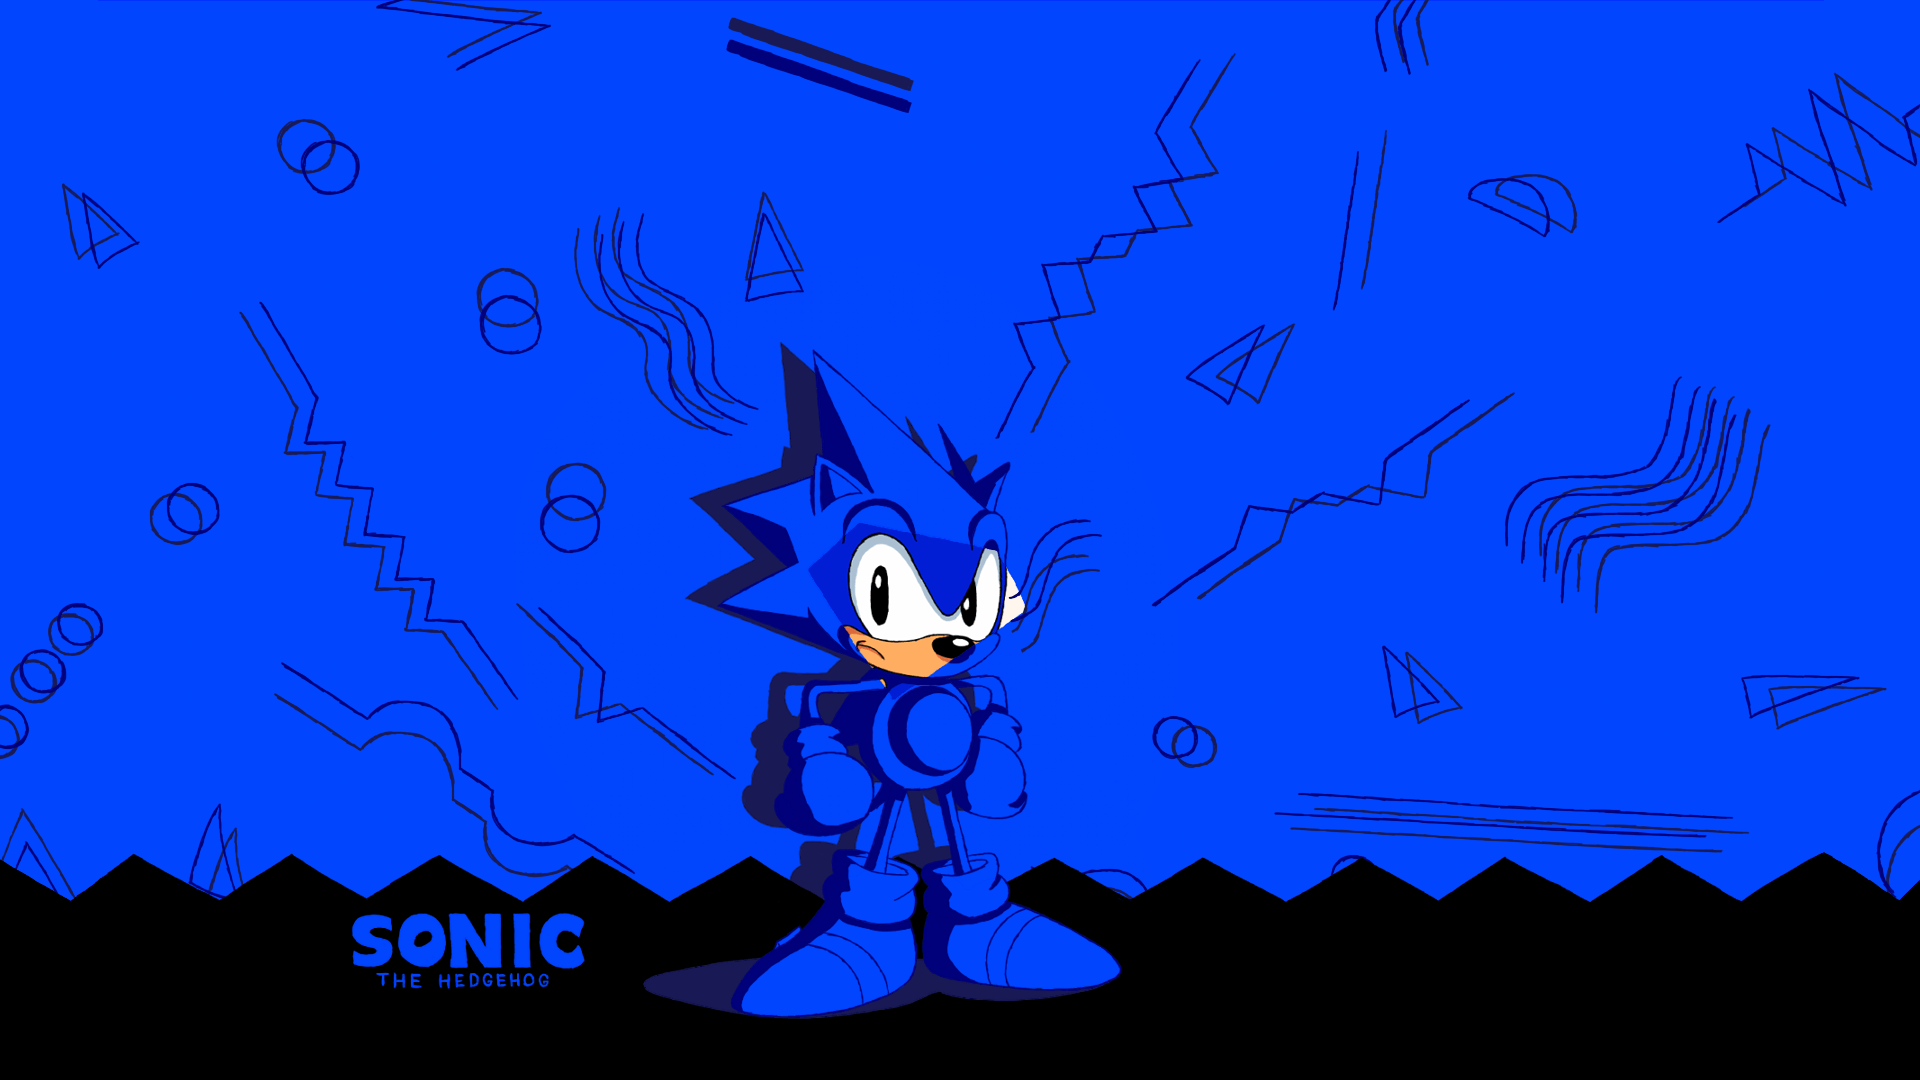 Some Classic themed wallpaper I drew up